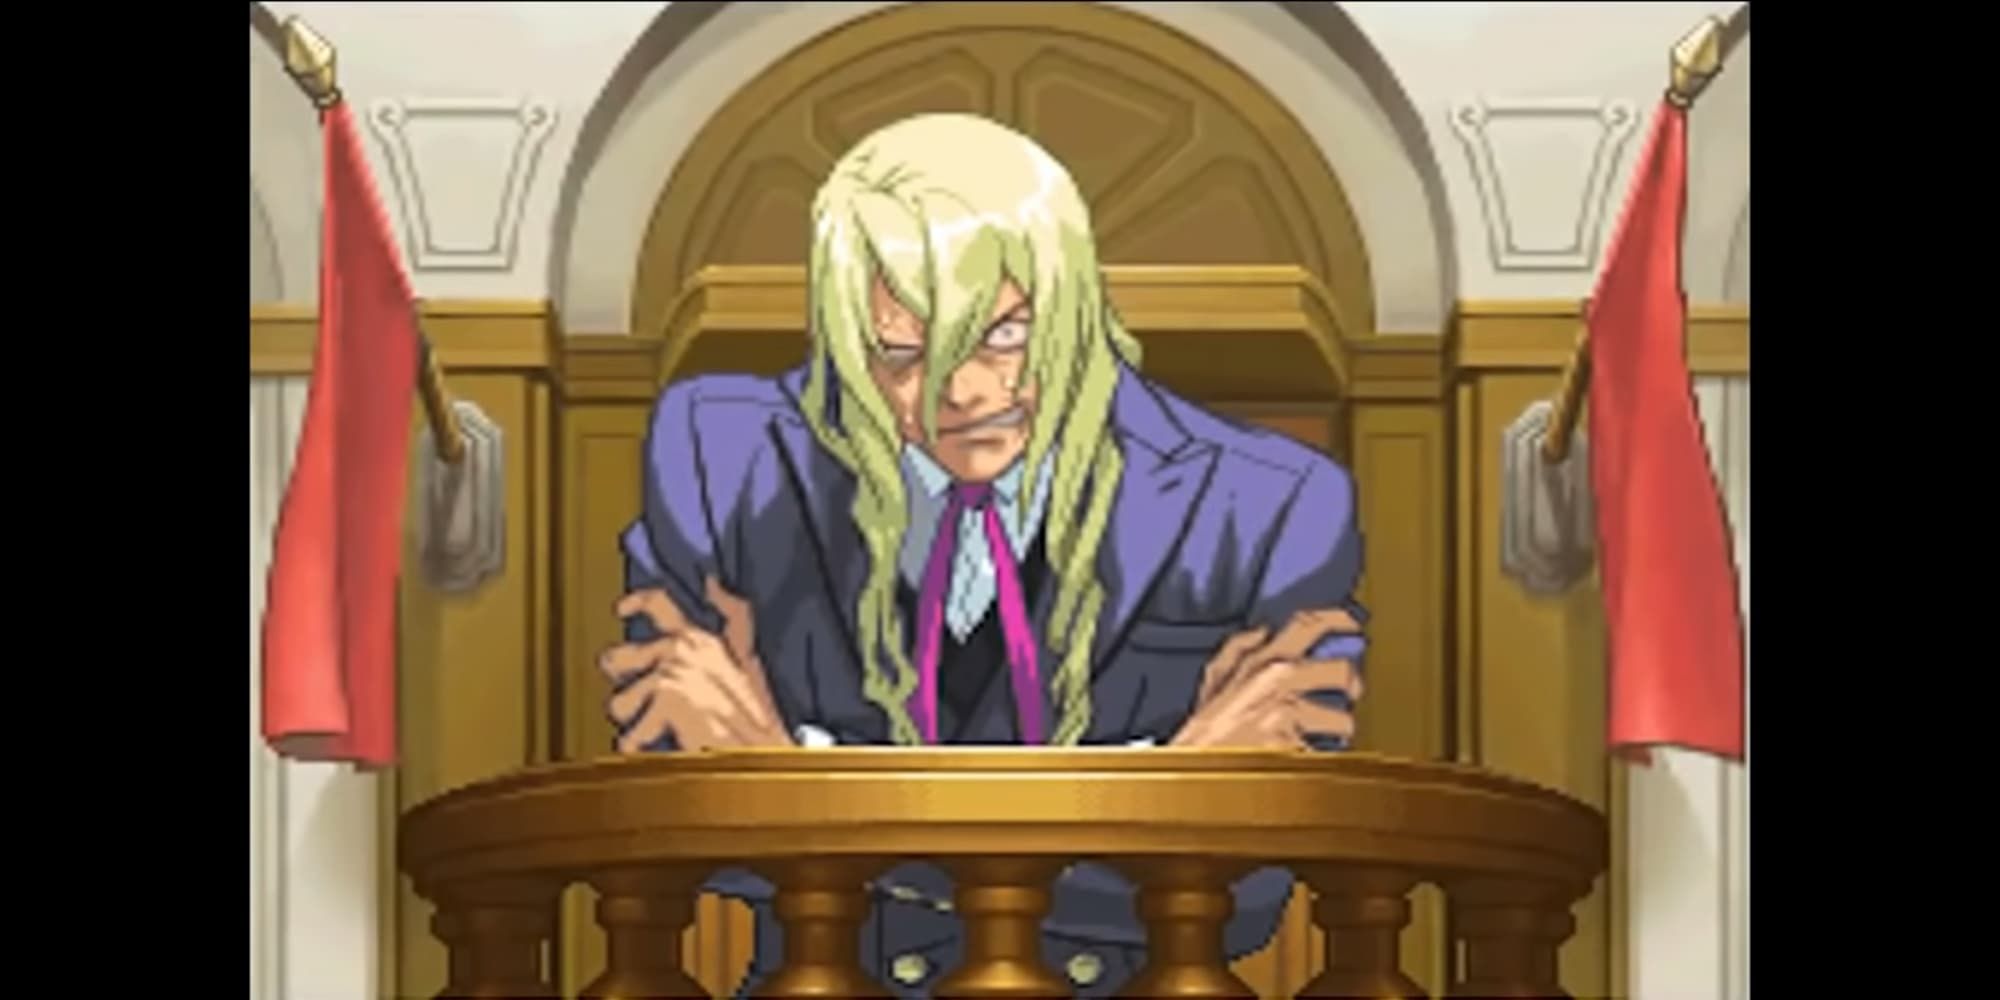 Ace Attorney Kristoph breakdown at witness stand in court long blond hair discheveled eyes behind glasses bloodshot wearing purple suit and hands crossed clutching at arms